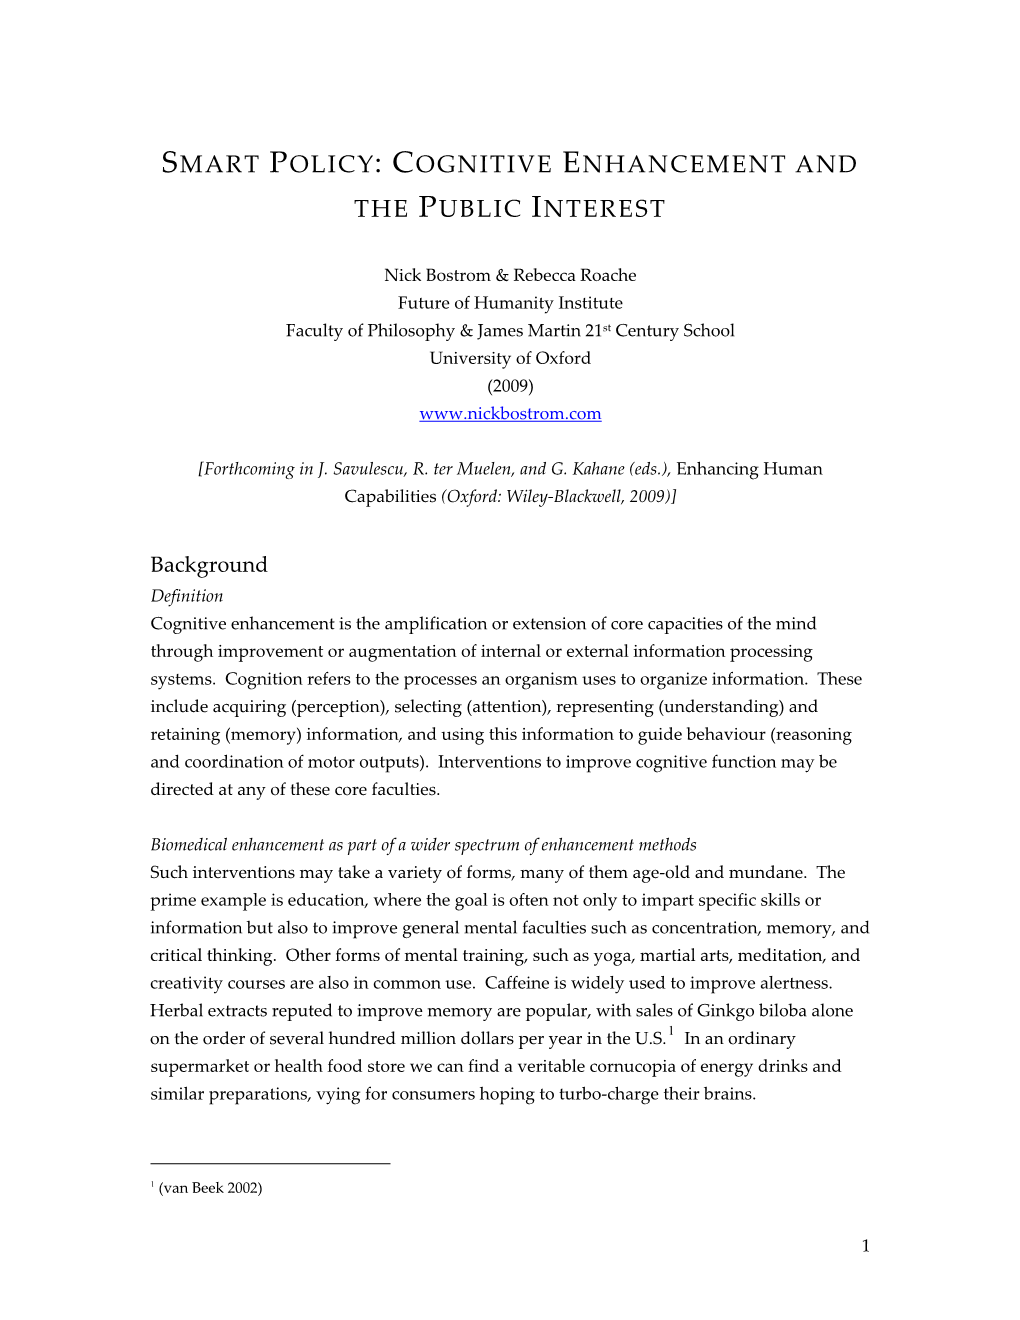 Smart Policy: Cognitive Enhancement and the Public Interest